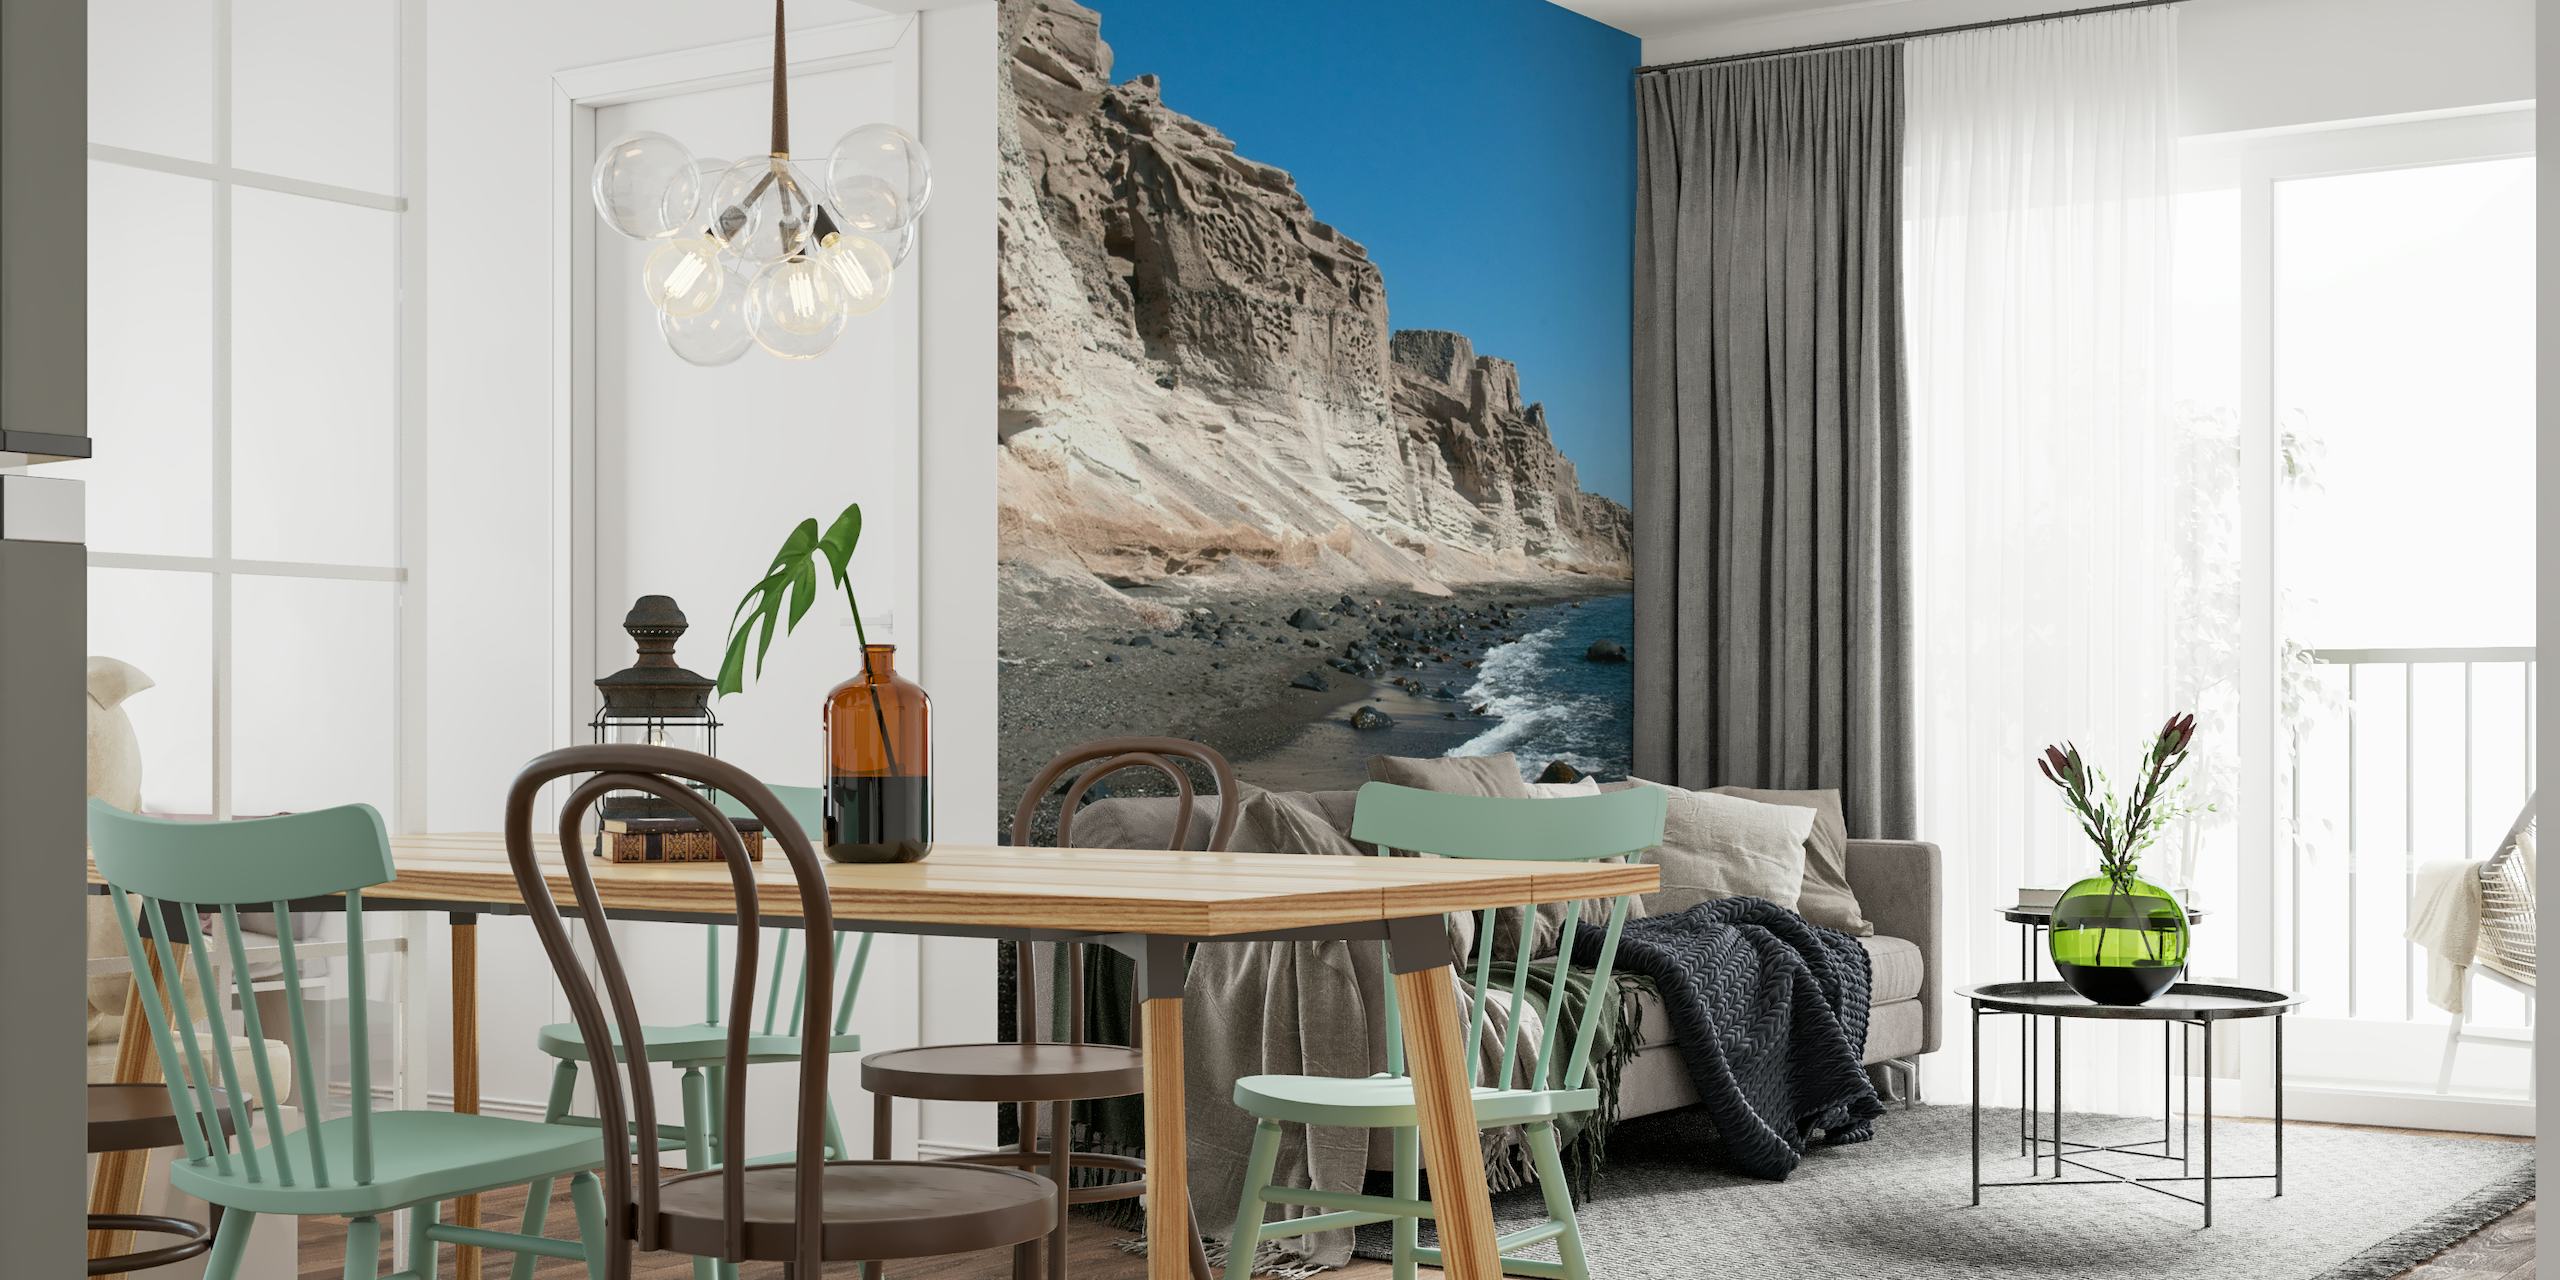 Santorini Coast wall mural depicting the rugged cliffs and cobalt sea of Greece